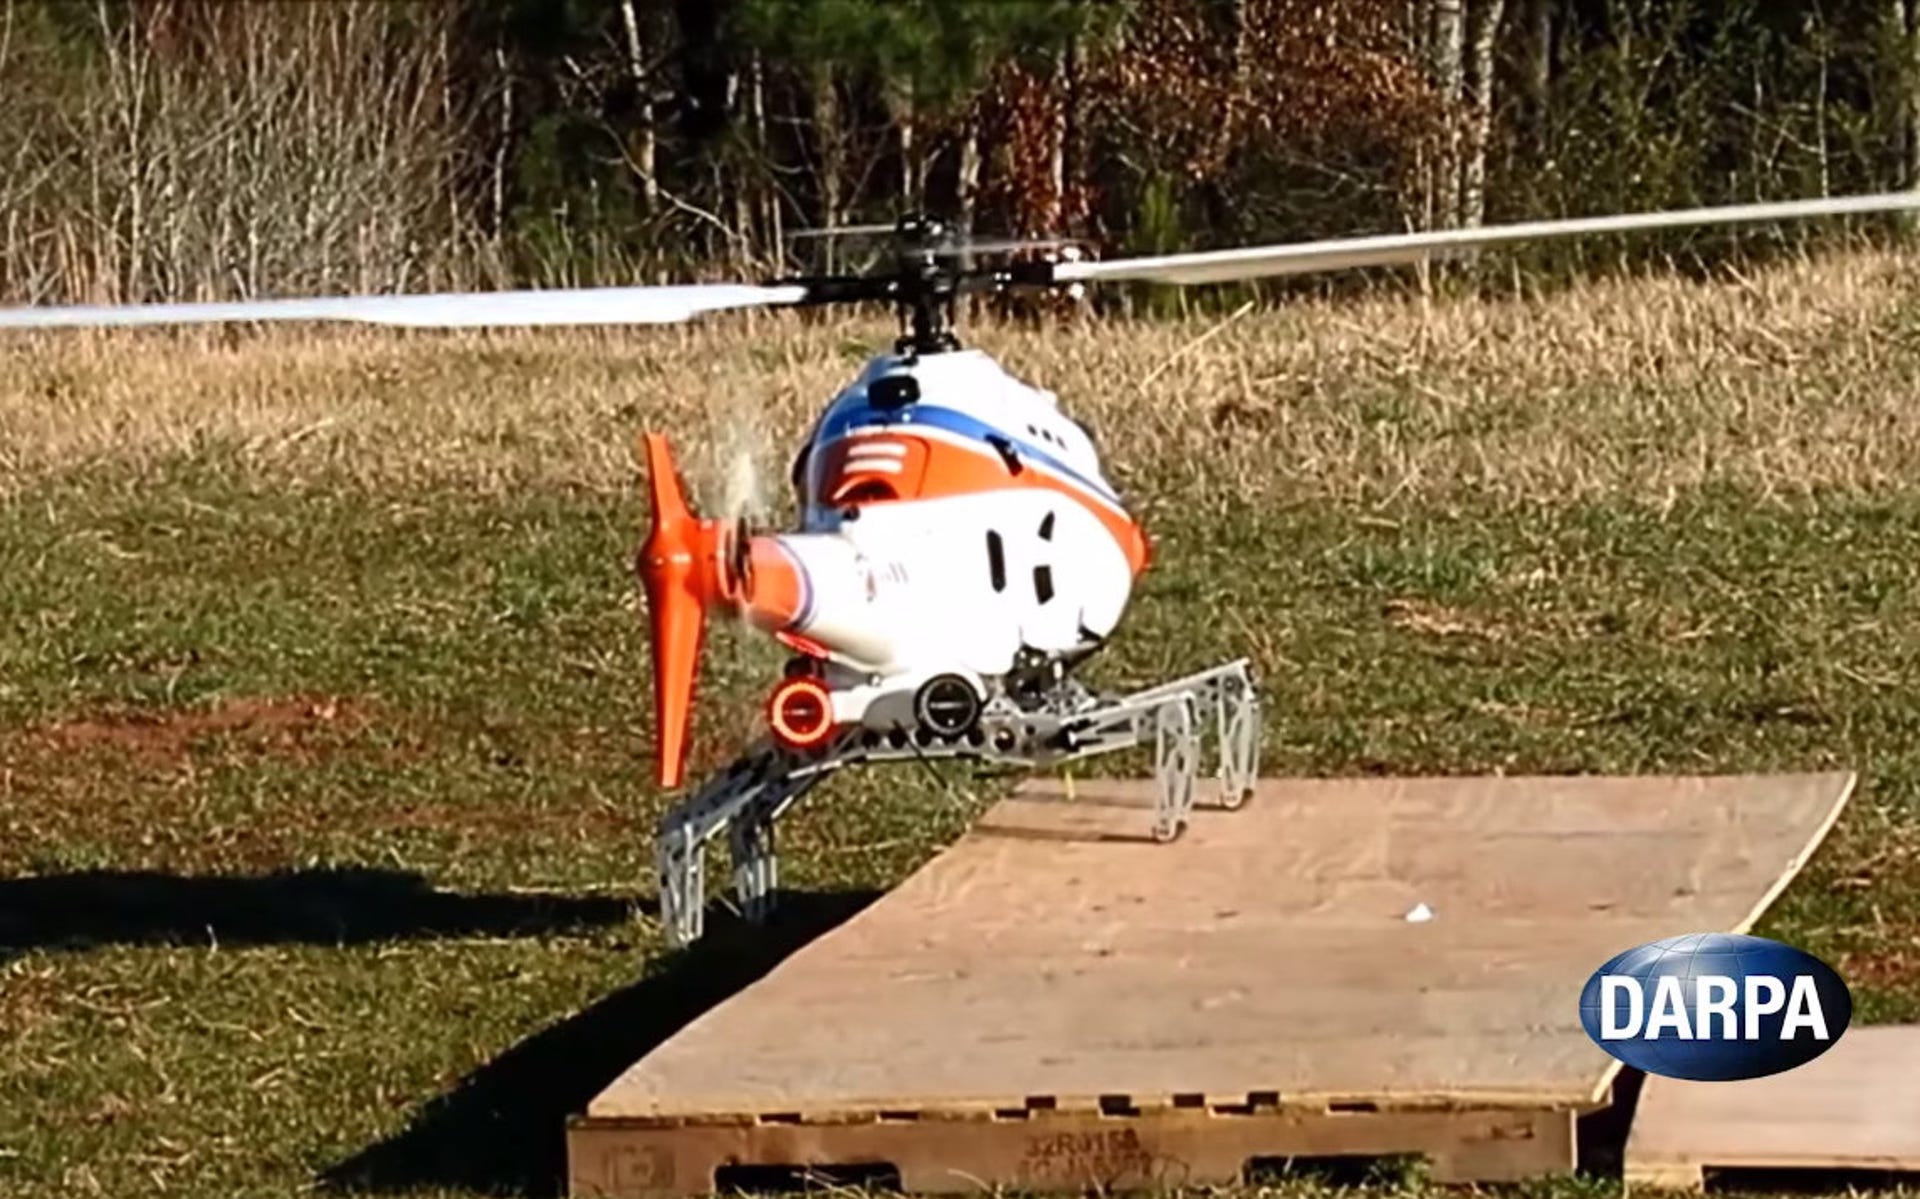 Darpa helicopter